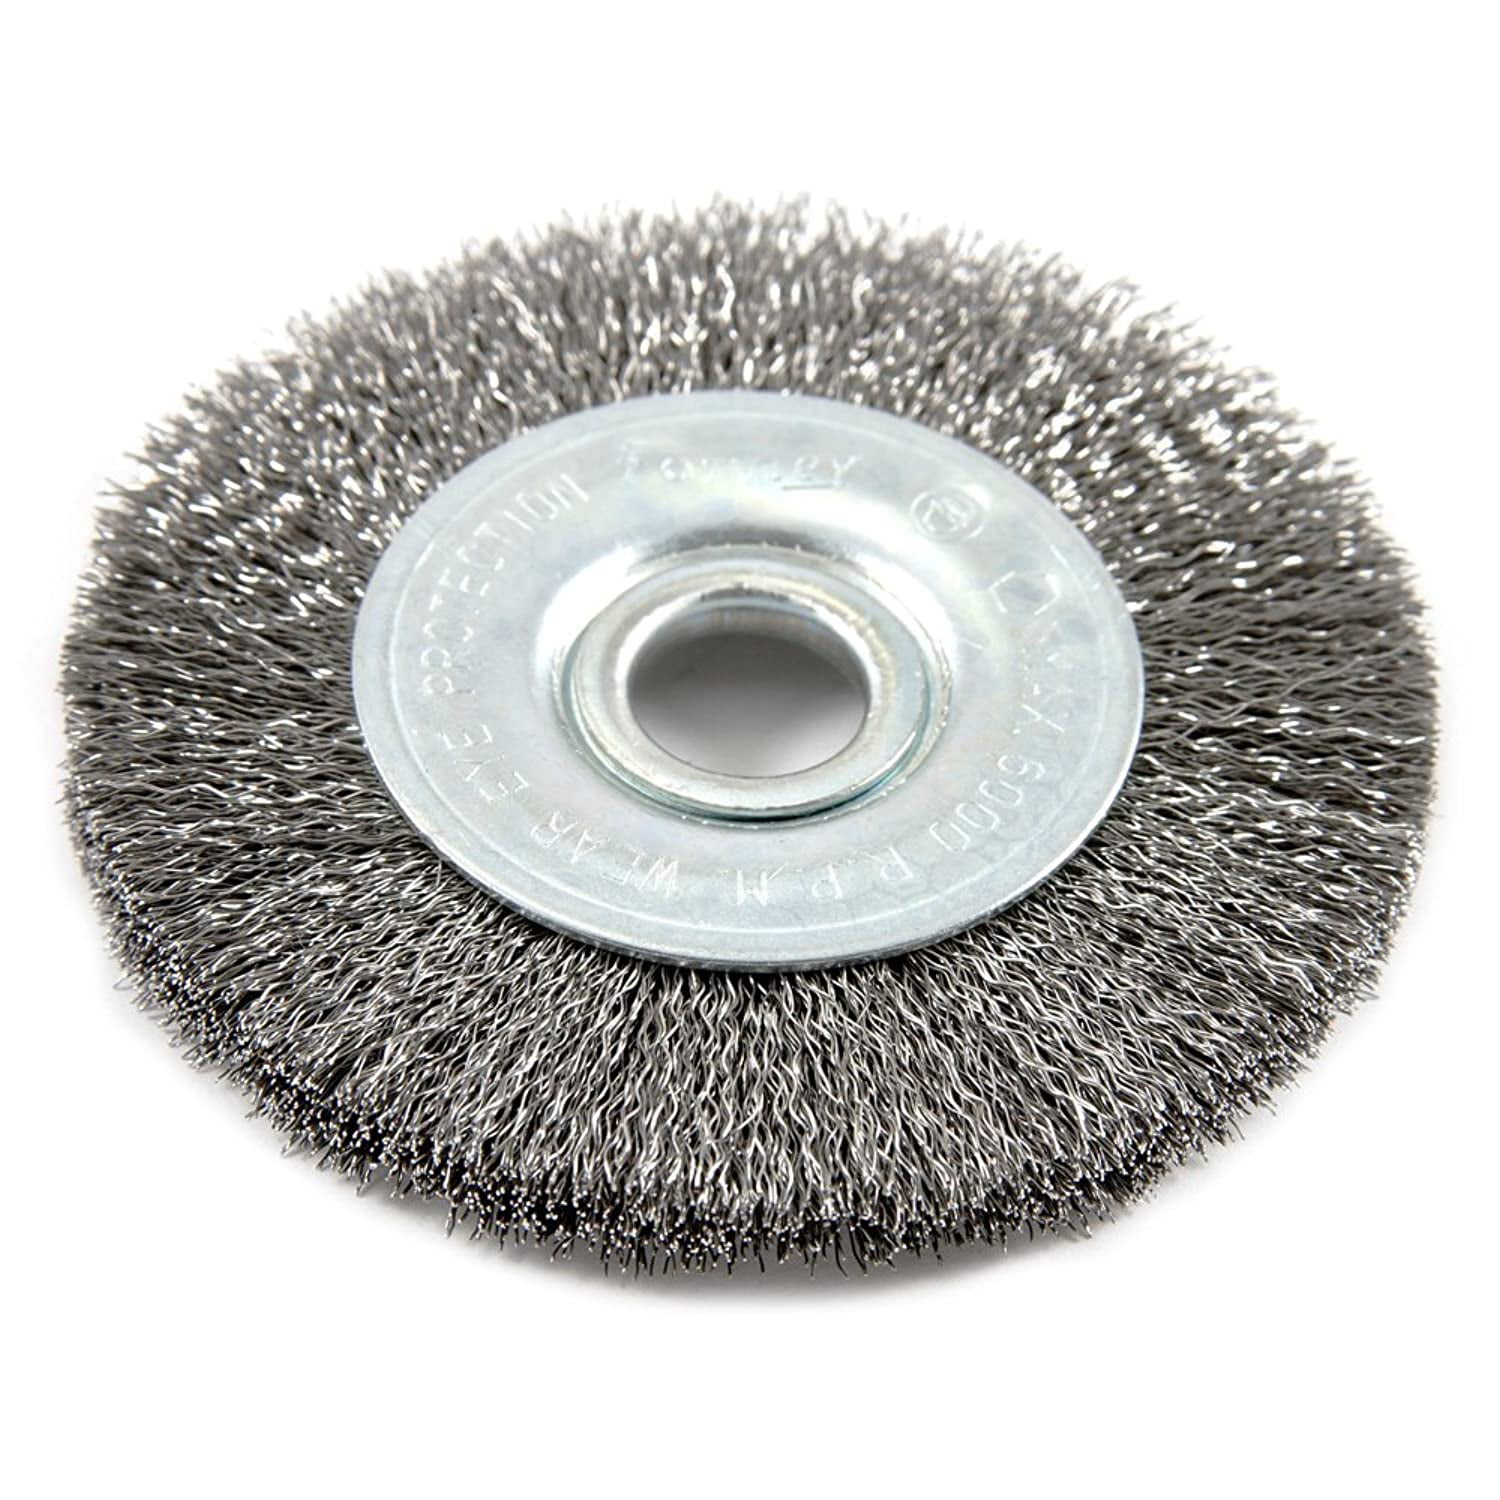 Forney 72748 Wire Wheel Brush Fine Crimped with 1//2-Inch Arbor,